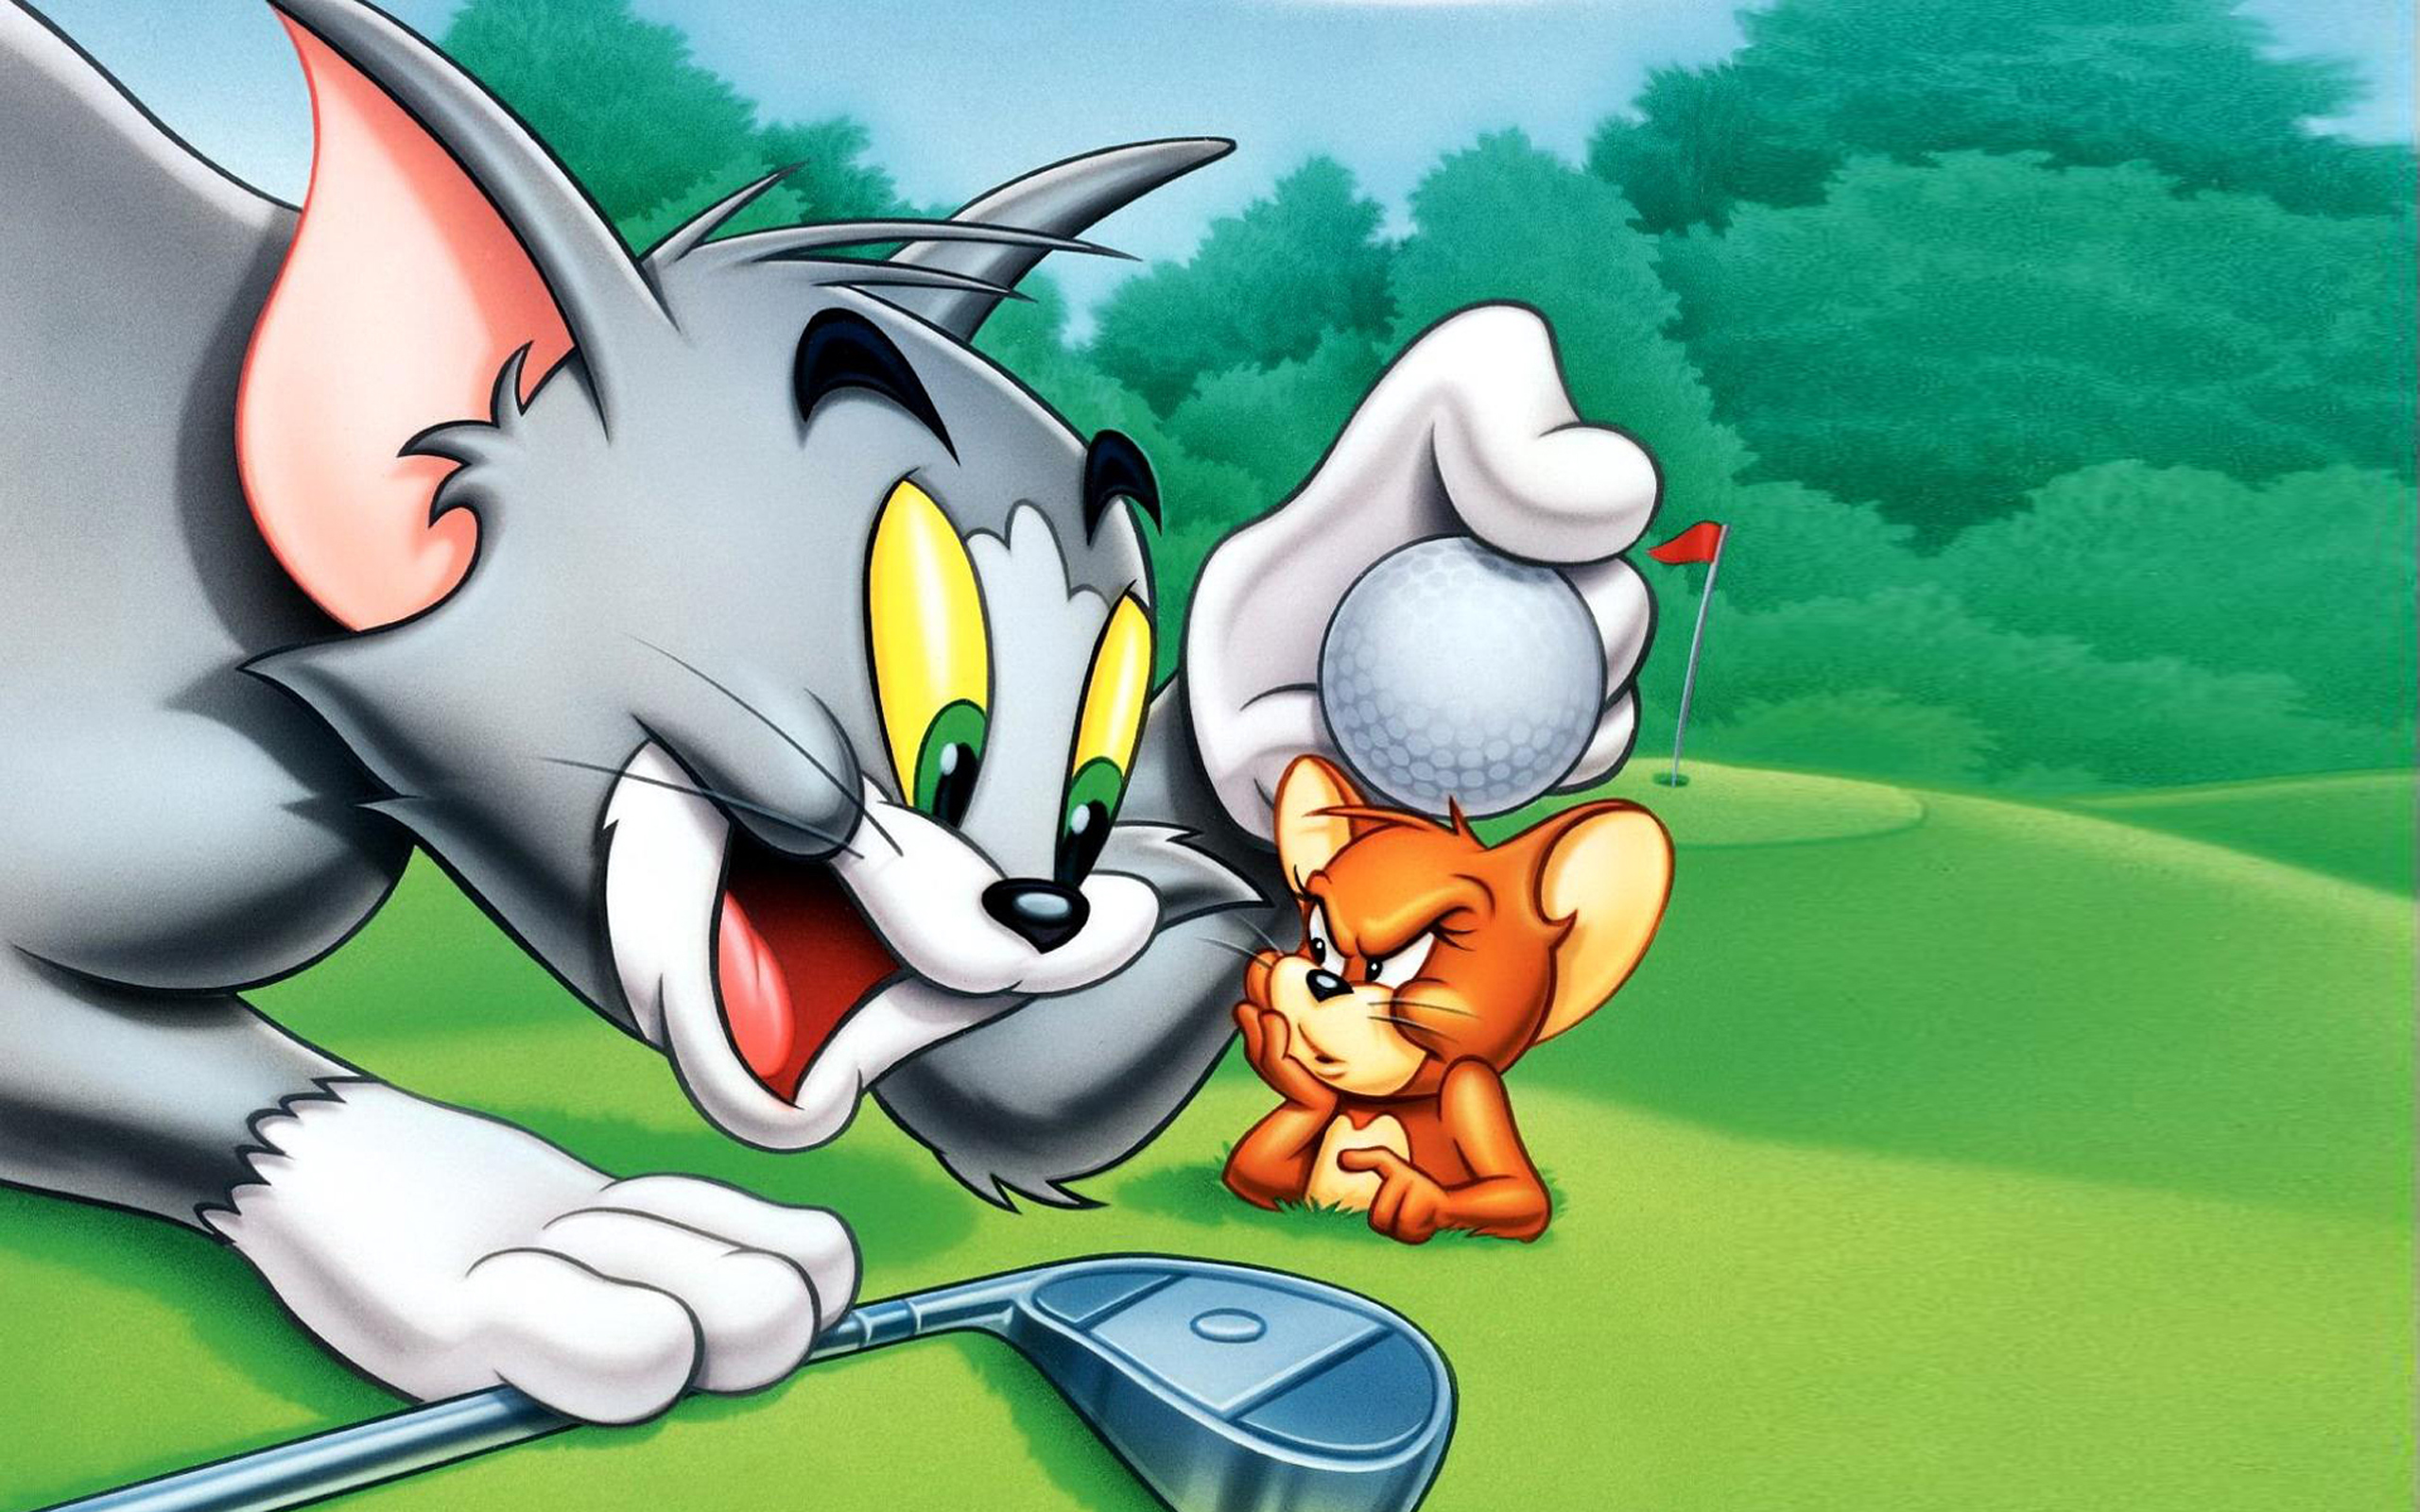 Tom And Jerry Greatests Chases Wallpaper Hd For Desktop Full Screen  2560x1600 : 